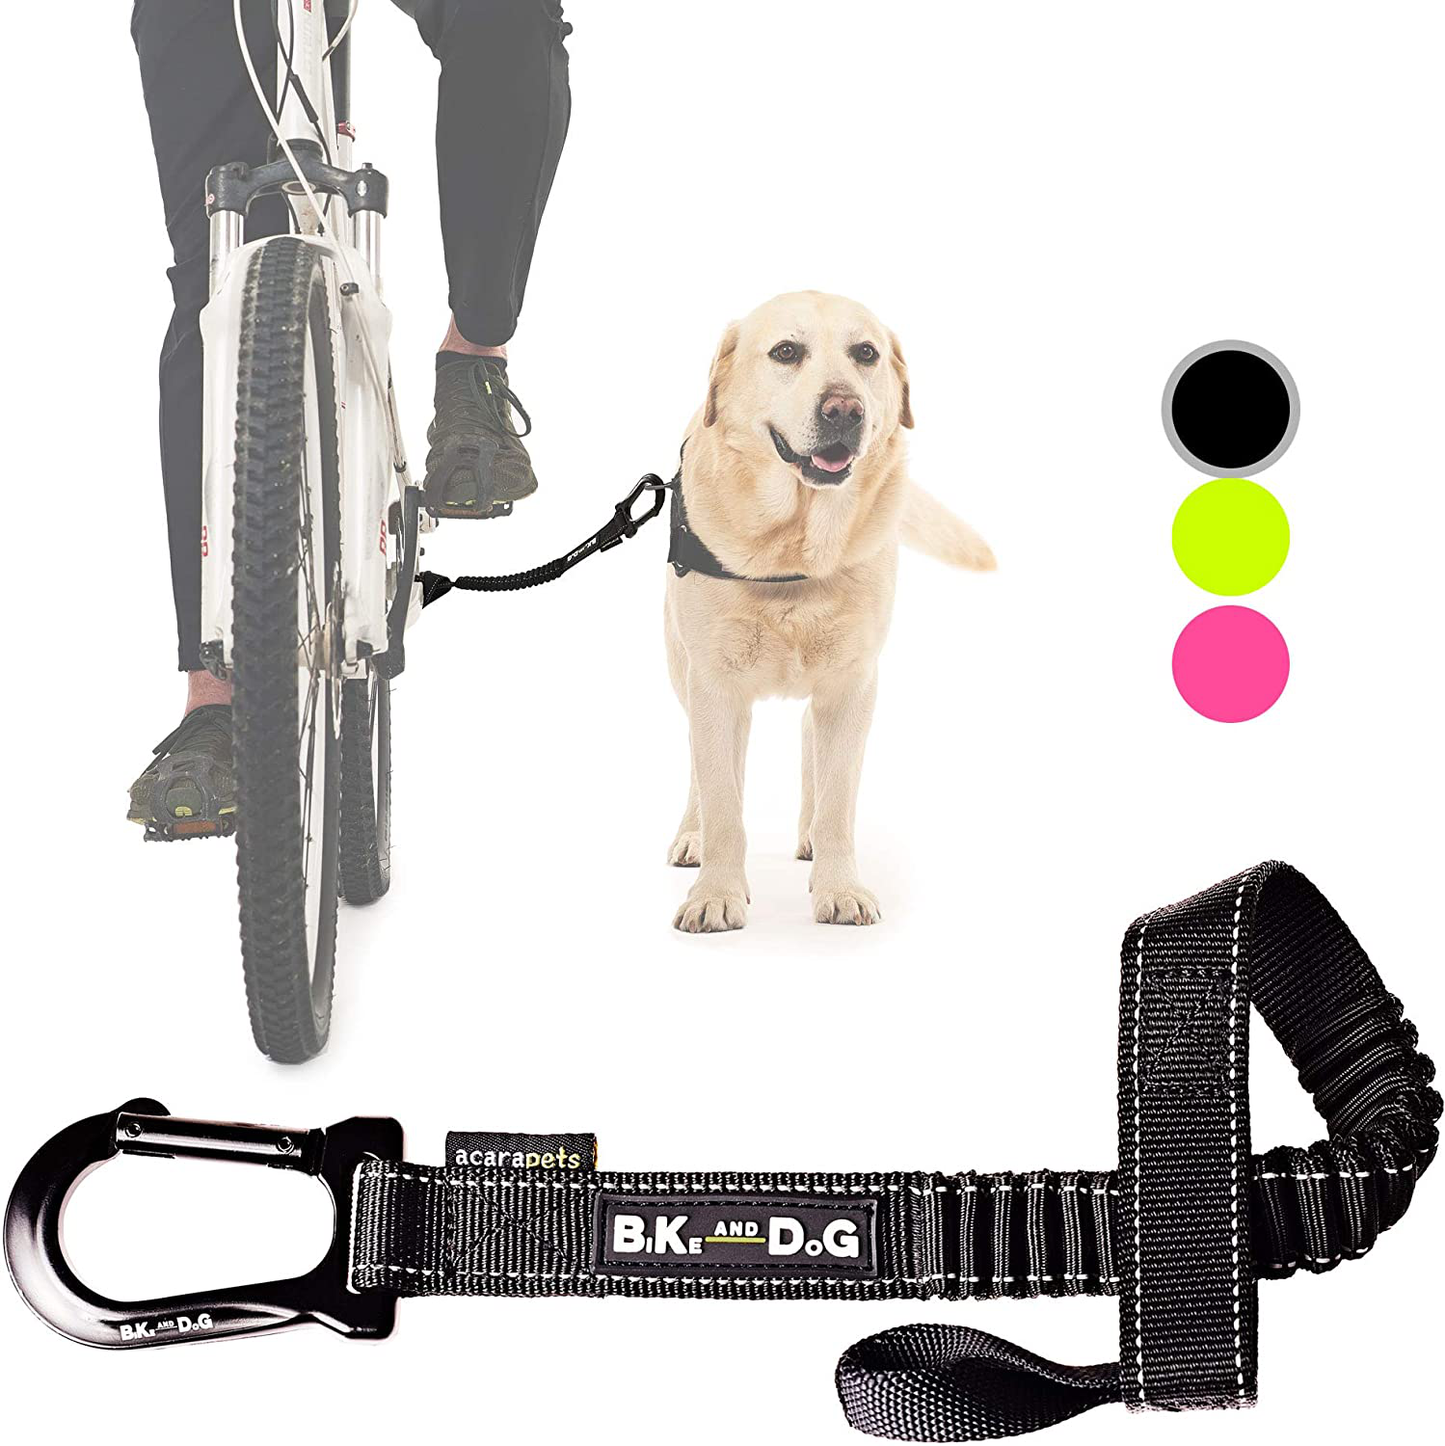 Dog Bike Leash, Hands Free Dog Leashes. Dog Bicycle Lead for Small, Medium and Large Dogs, Designed to Lead One or More Dogs with Maximum Safety, Easy Assembly without Tools. Patented Product. Animals & Pet Supplies > Pet Supplies > Dog Supplies > Dog Treadmills BIKE AND DOG black  